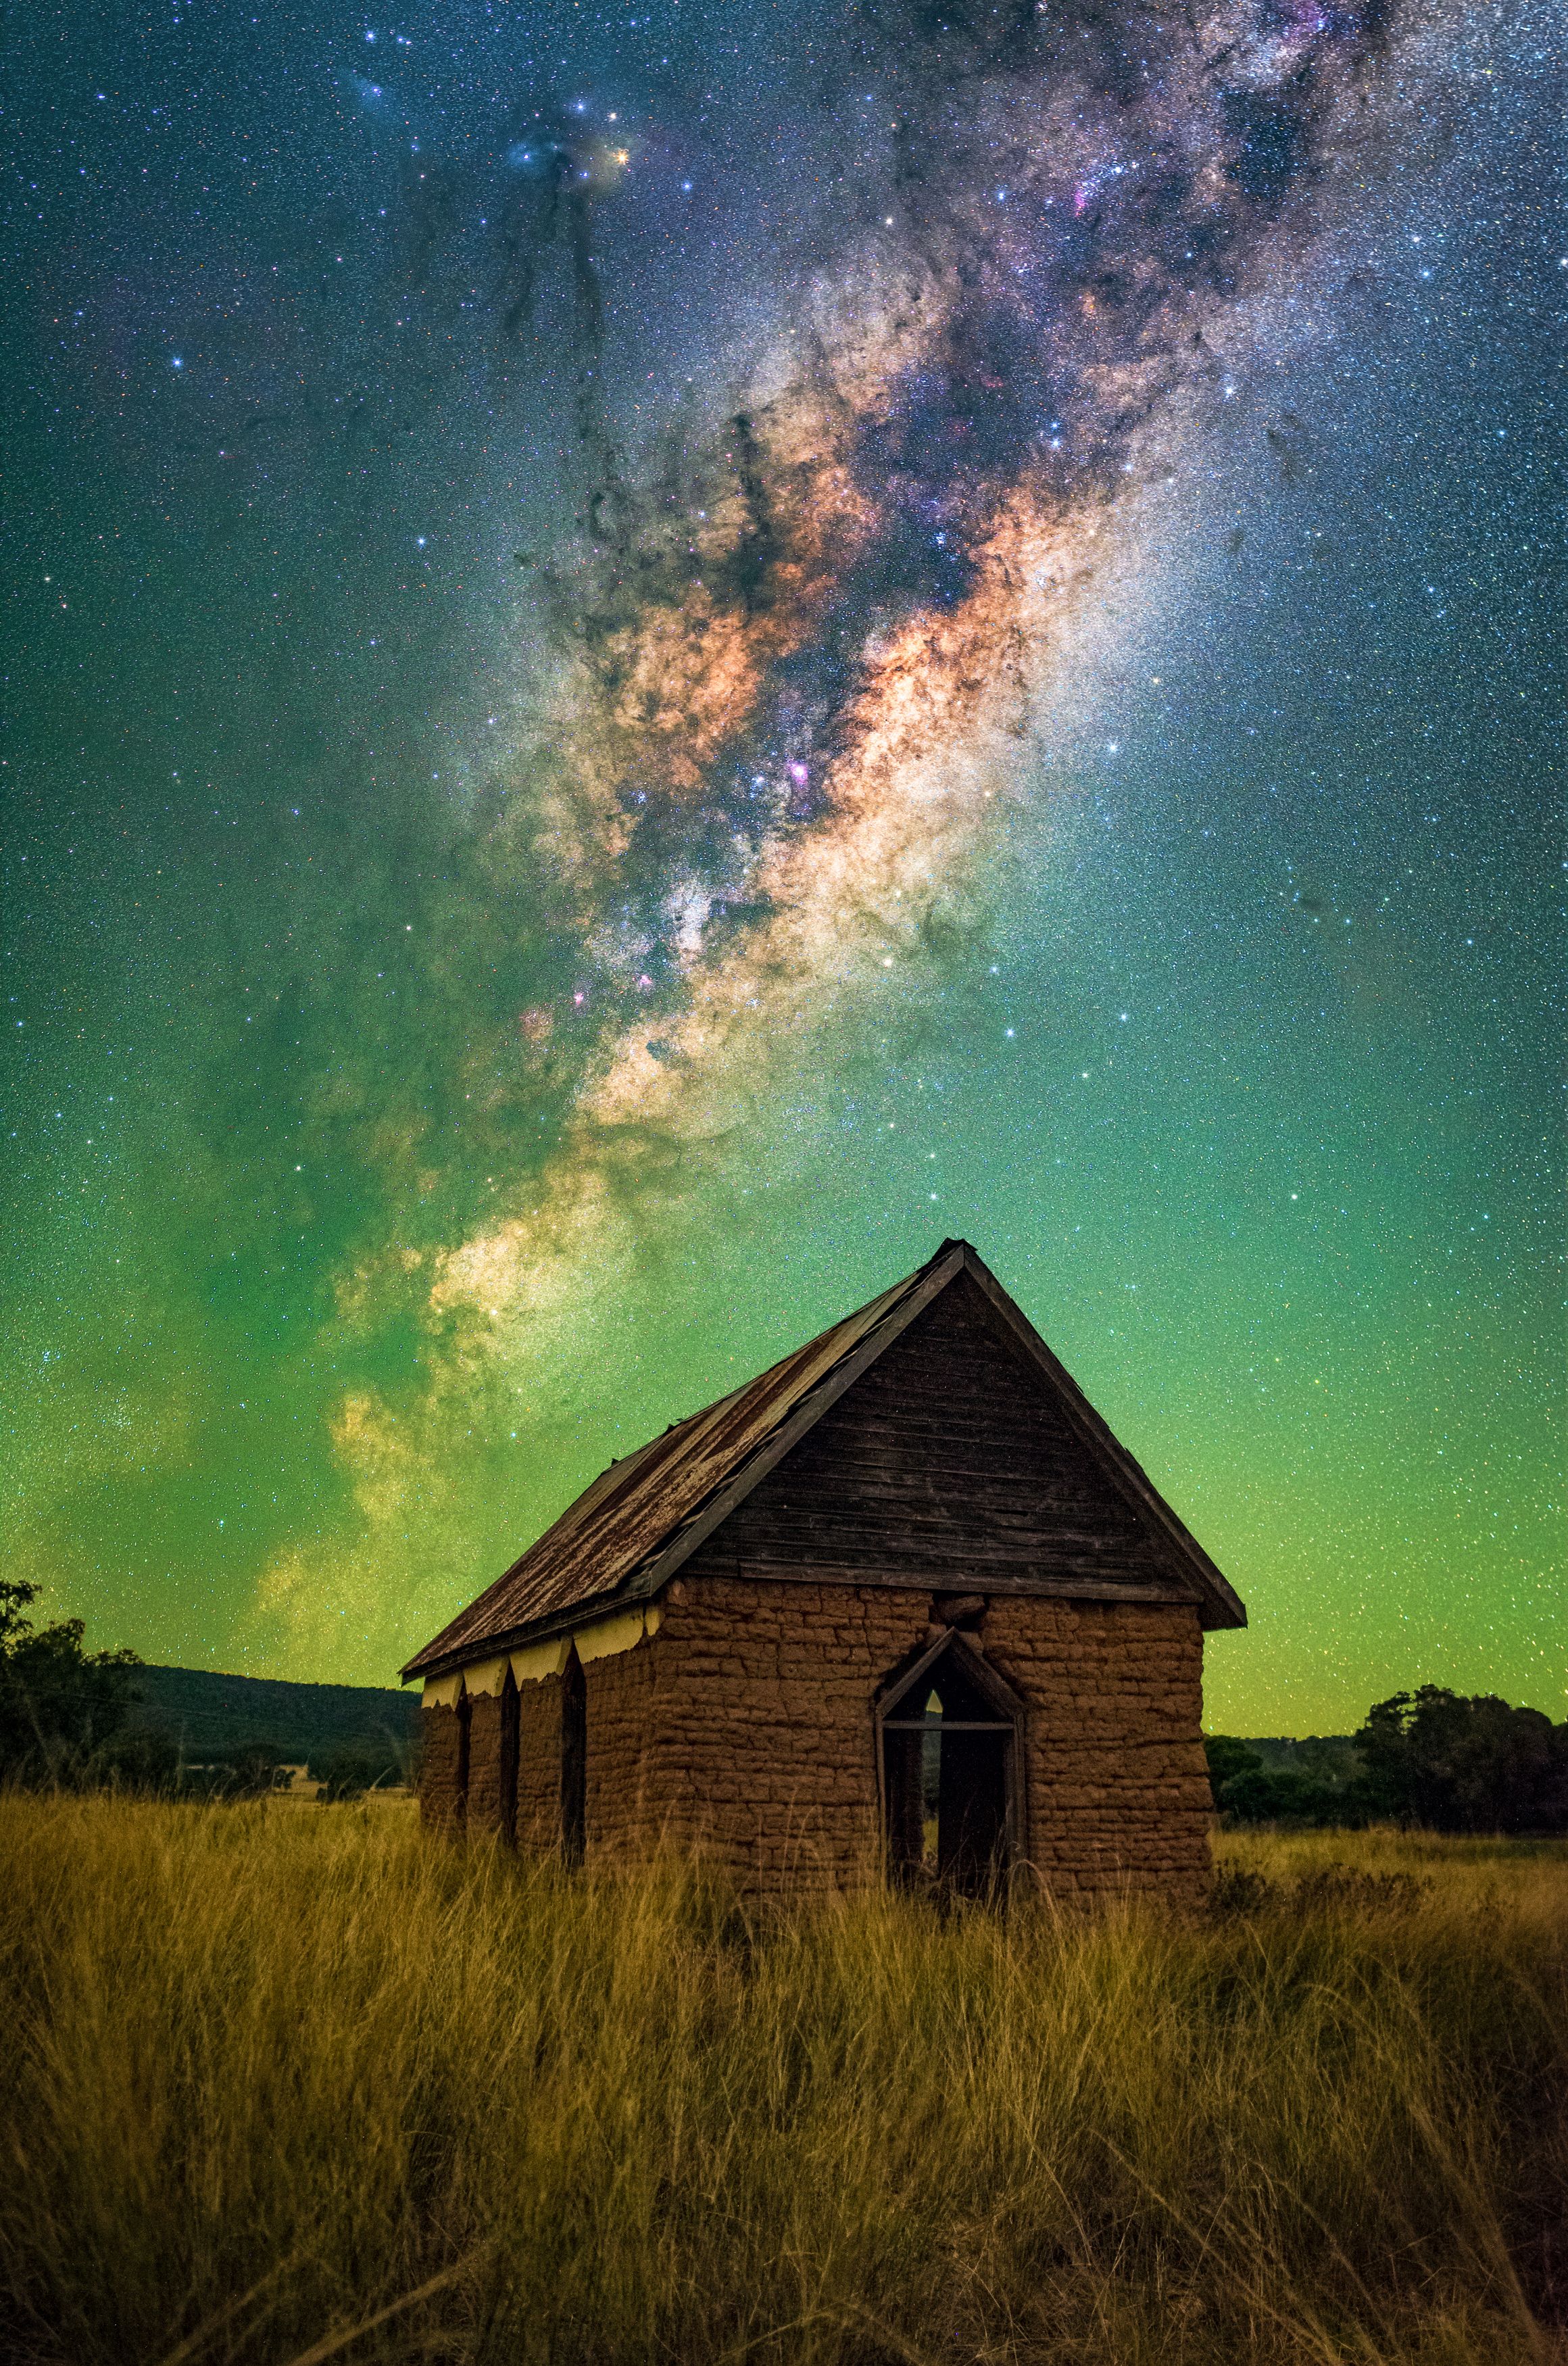 #night #love #stars #nightscape #milyway #abandoned, Fascinating Imagery